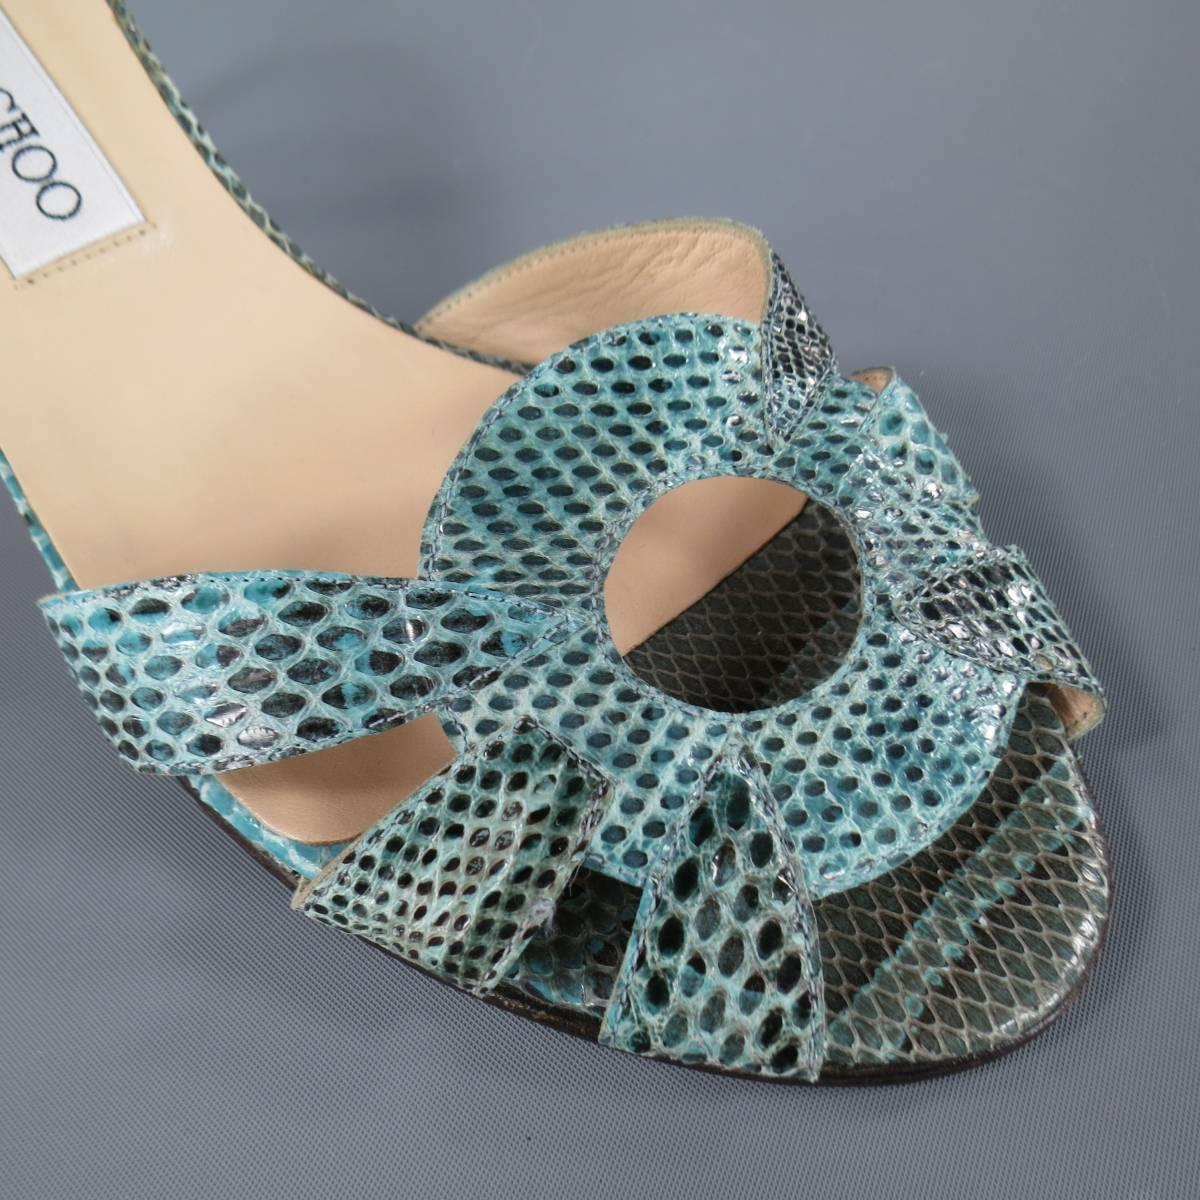 These fabulous JIMMY CHOO sandals come in light aqua teal snake skin leather and feature a thick cutout O strap, peep toe, and covered stiletto heel. Made in Italy.
 
Good Pre-Owned Condition.
Marked: 39
 
Measurements:
 
Length: 10